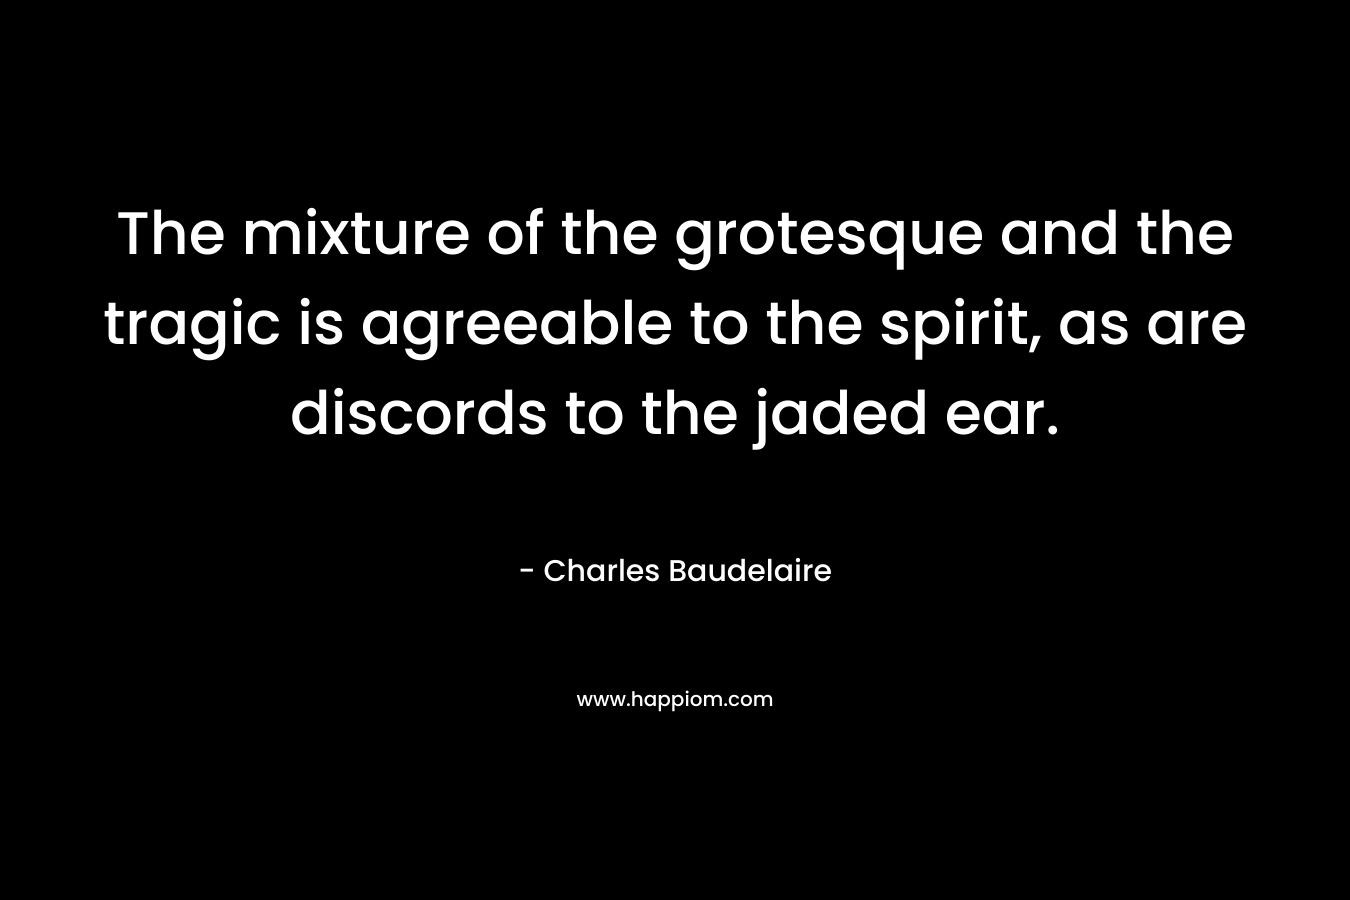 The mixture of the grotesque and the tragic is agreeable to the spirit, as are discords to the jaded ear.